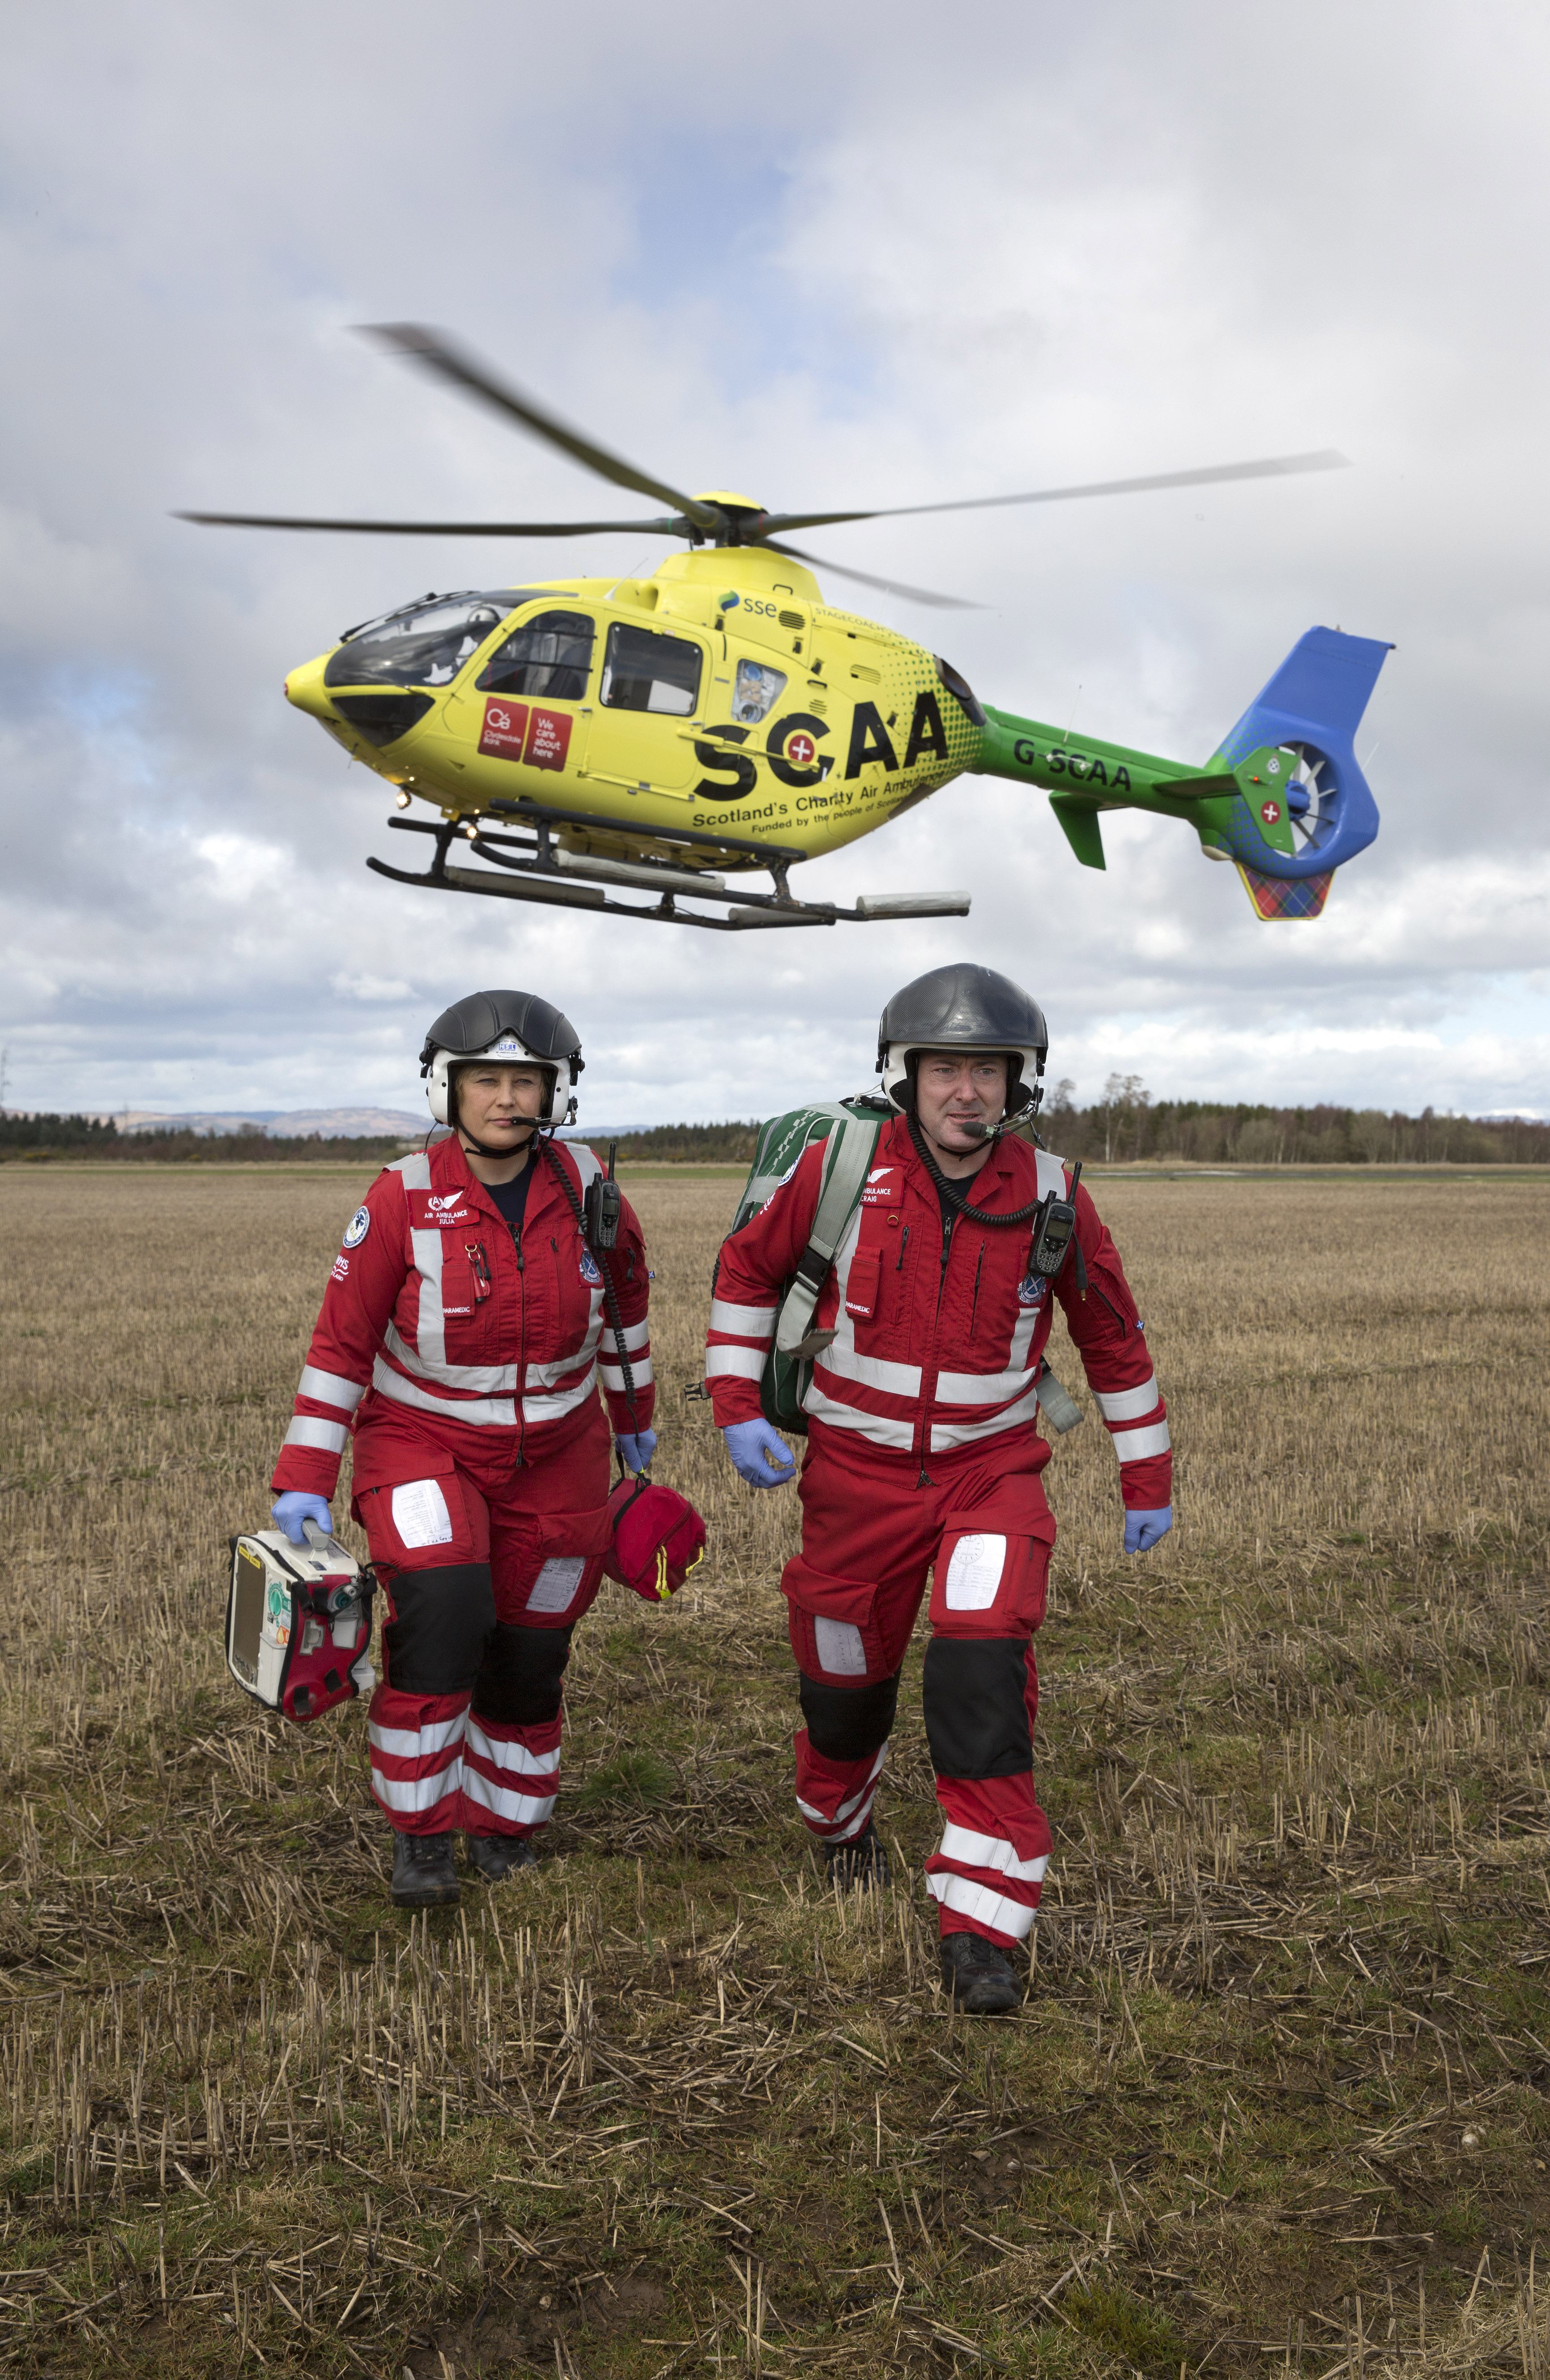 Two paramedics walk under helicopter.